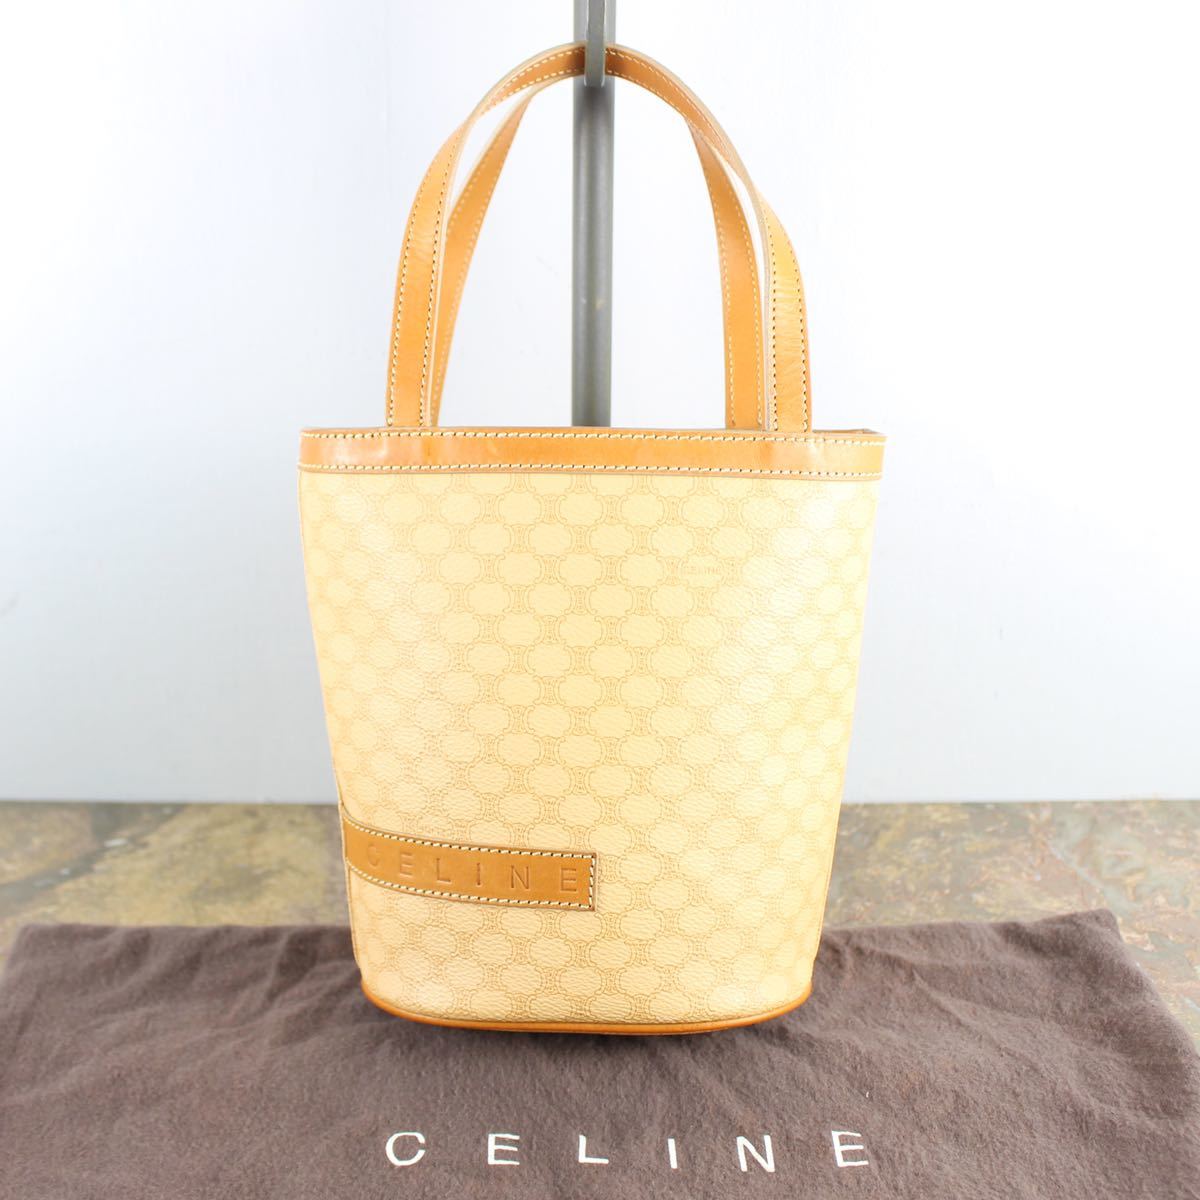 OLD CELINE MACADAM PATTERNED BACKET TYPE HAND BAG MADE IN ITALY/オールドセリーヌマカダム柄ハンドバッグ